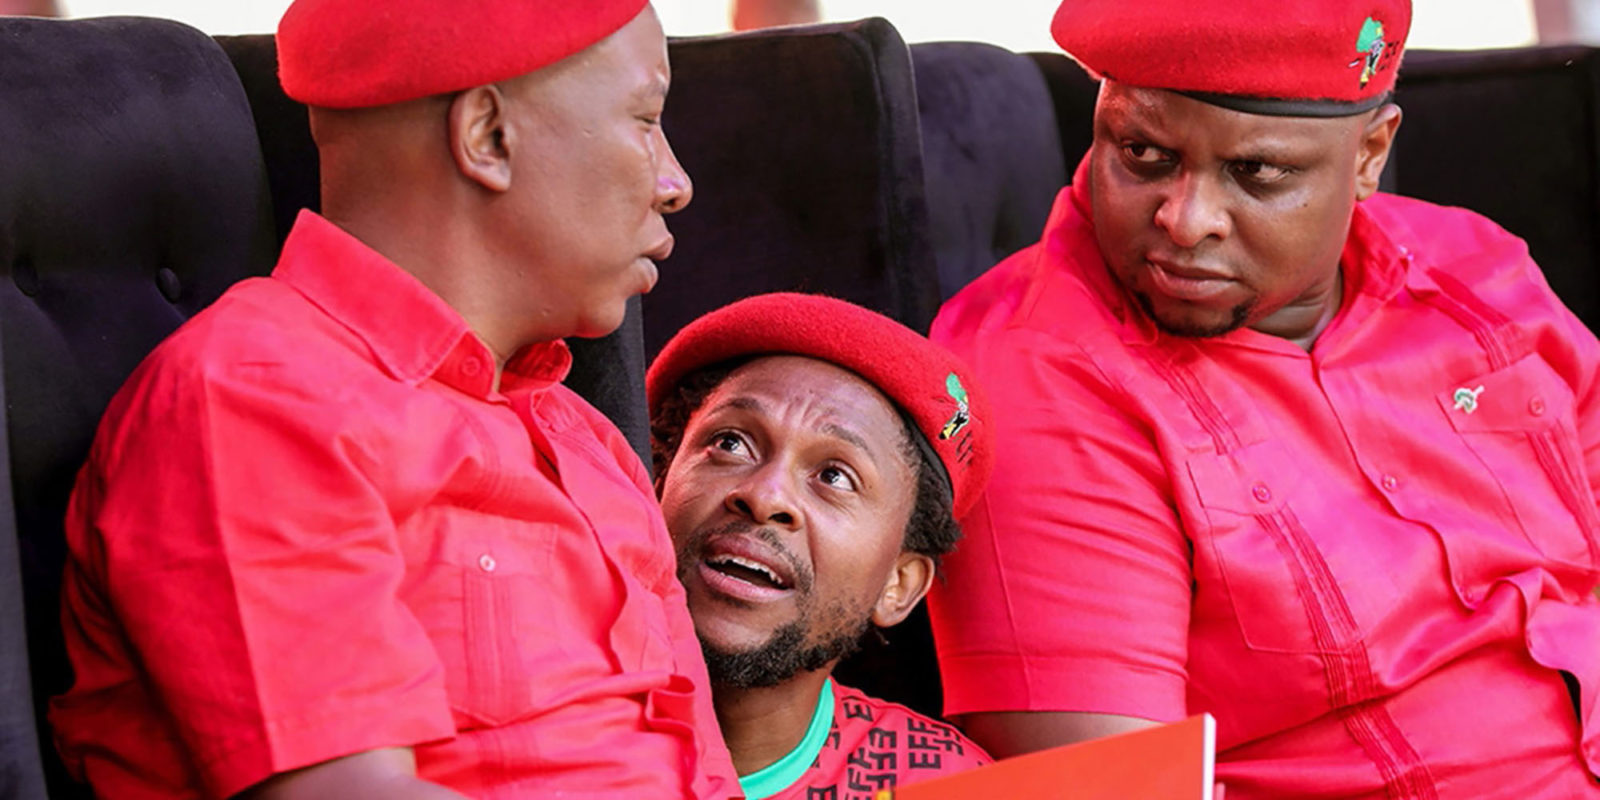 Ndlozi : You Wanted Us To Ask Mbuyiseni Ndlozi About His Looks So We Did Youtube : Speaking on sabc 2 morning live's tracy going, ndlozi said he's honoured.